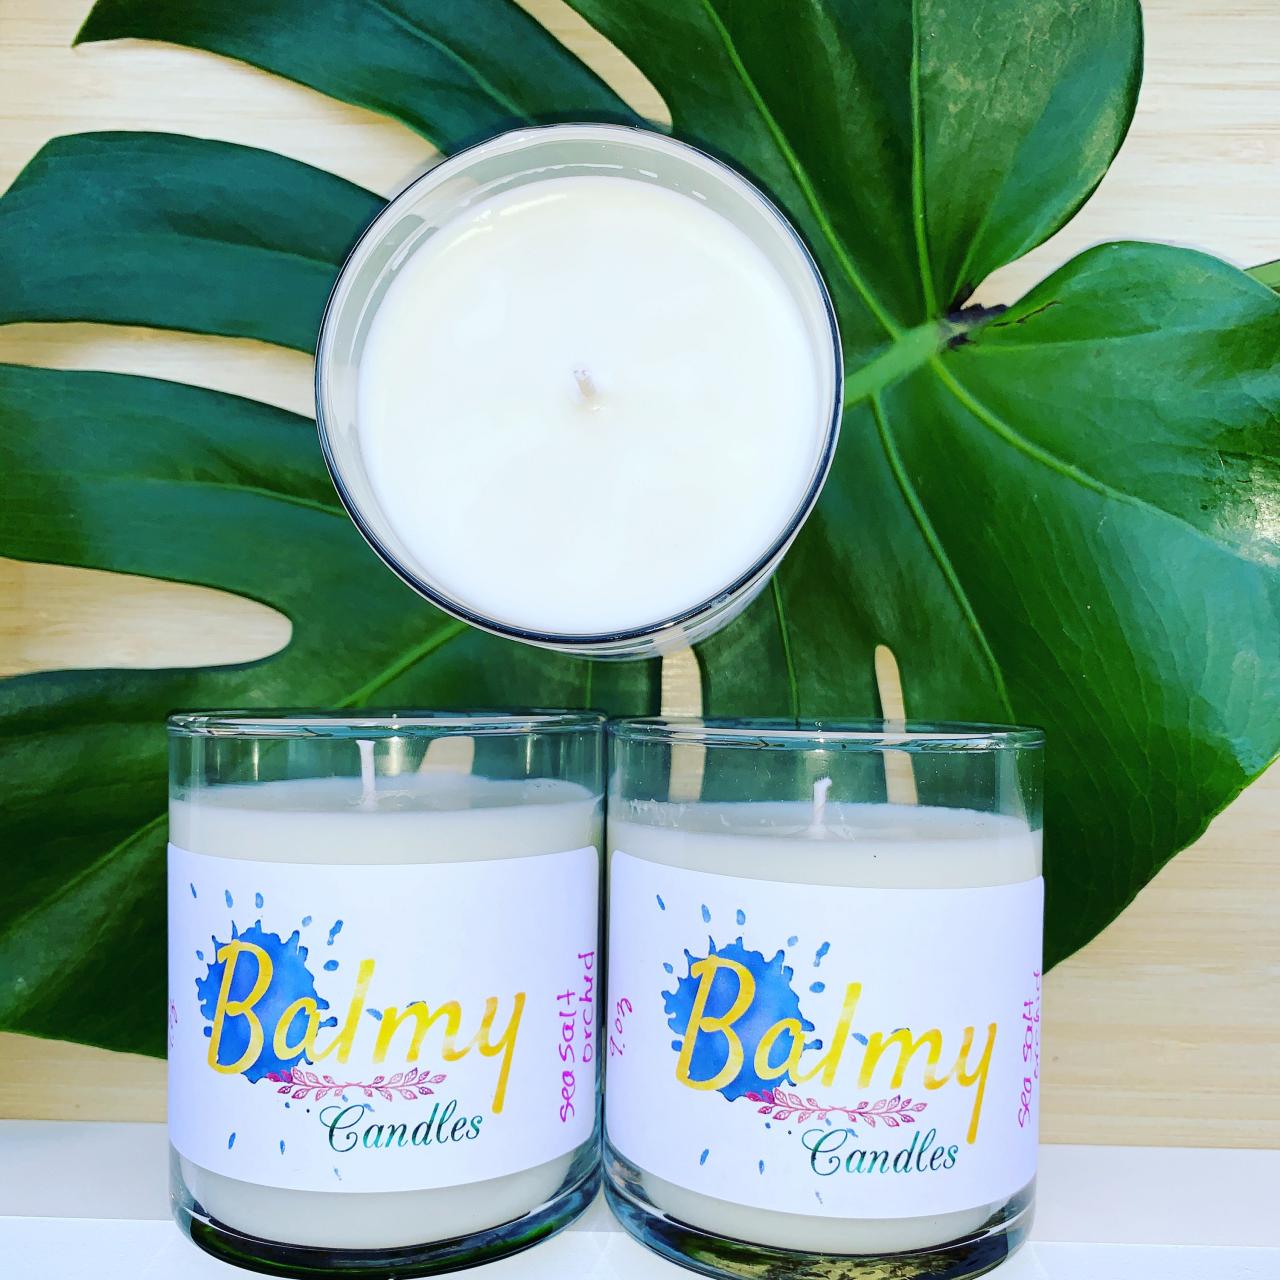 Sea Salt Orchid Soy Wax Candle | Handmade Candle